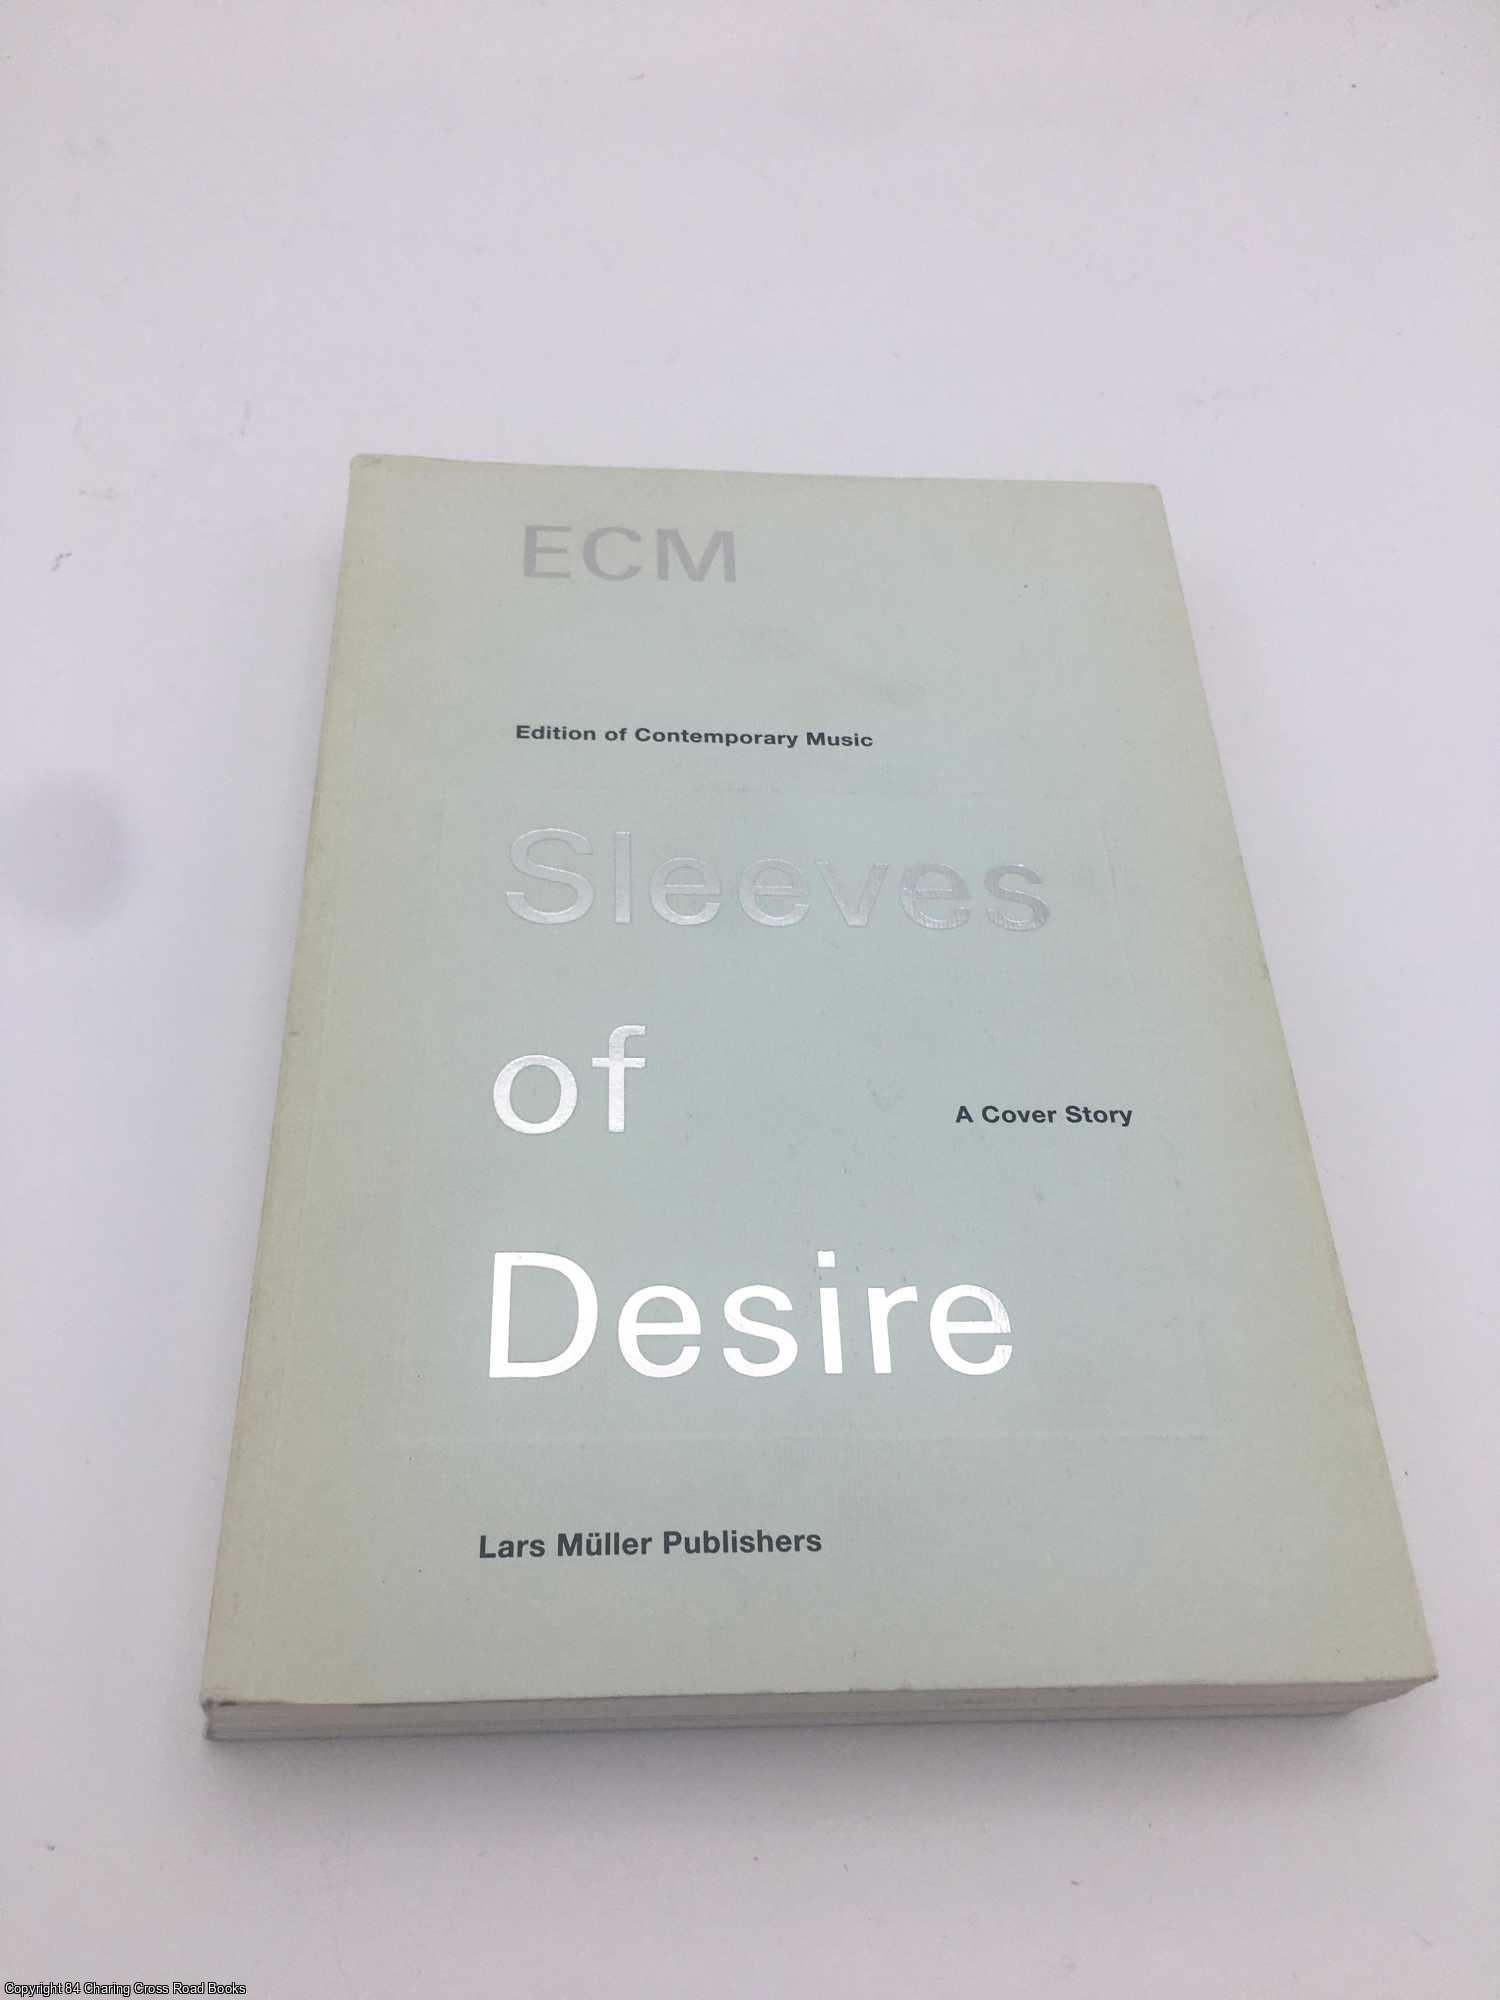 ECM: Sleeves of Desire: A Cover Story by Lars Müller on 84 Charing Cross  Rare Books